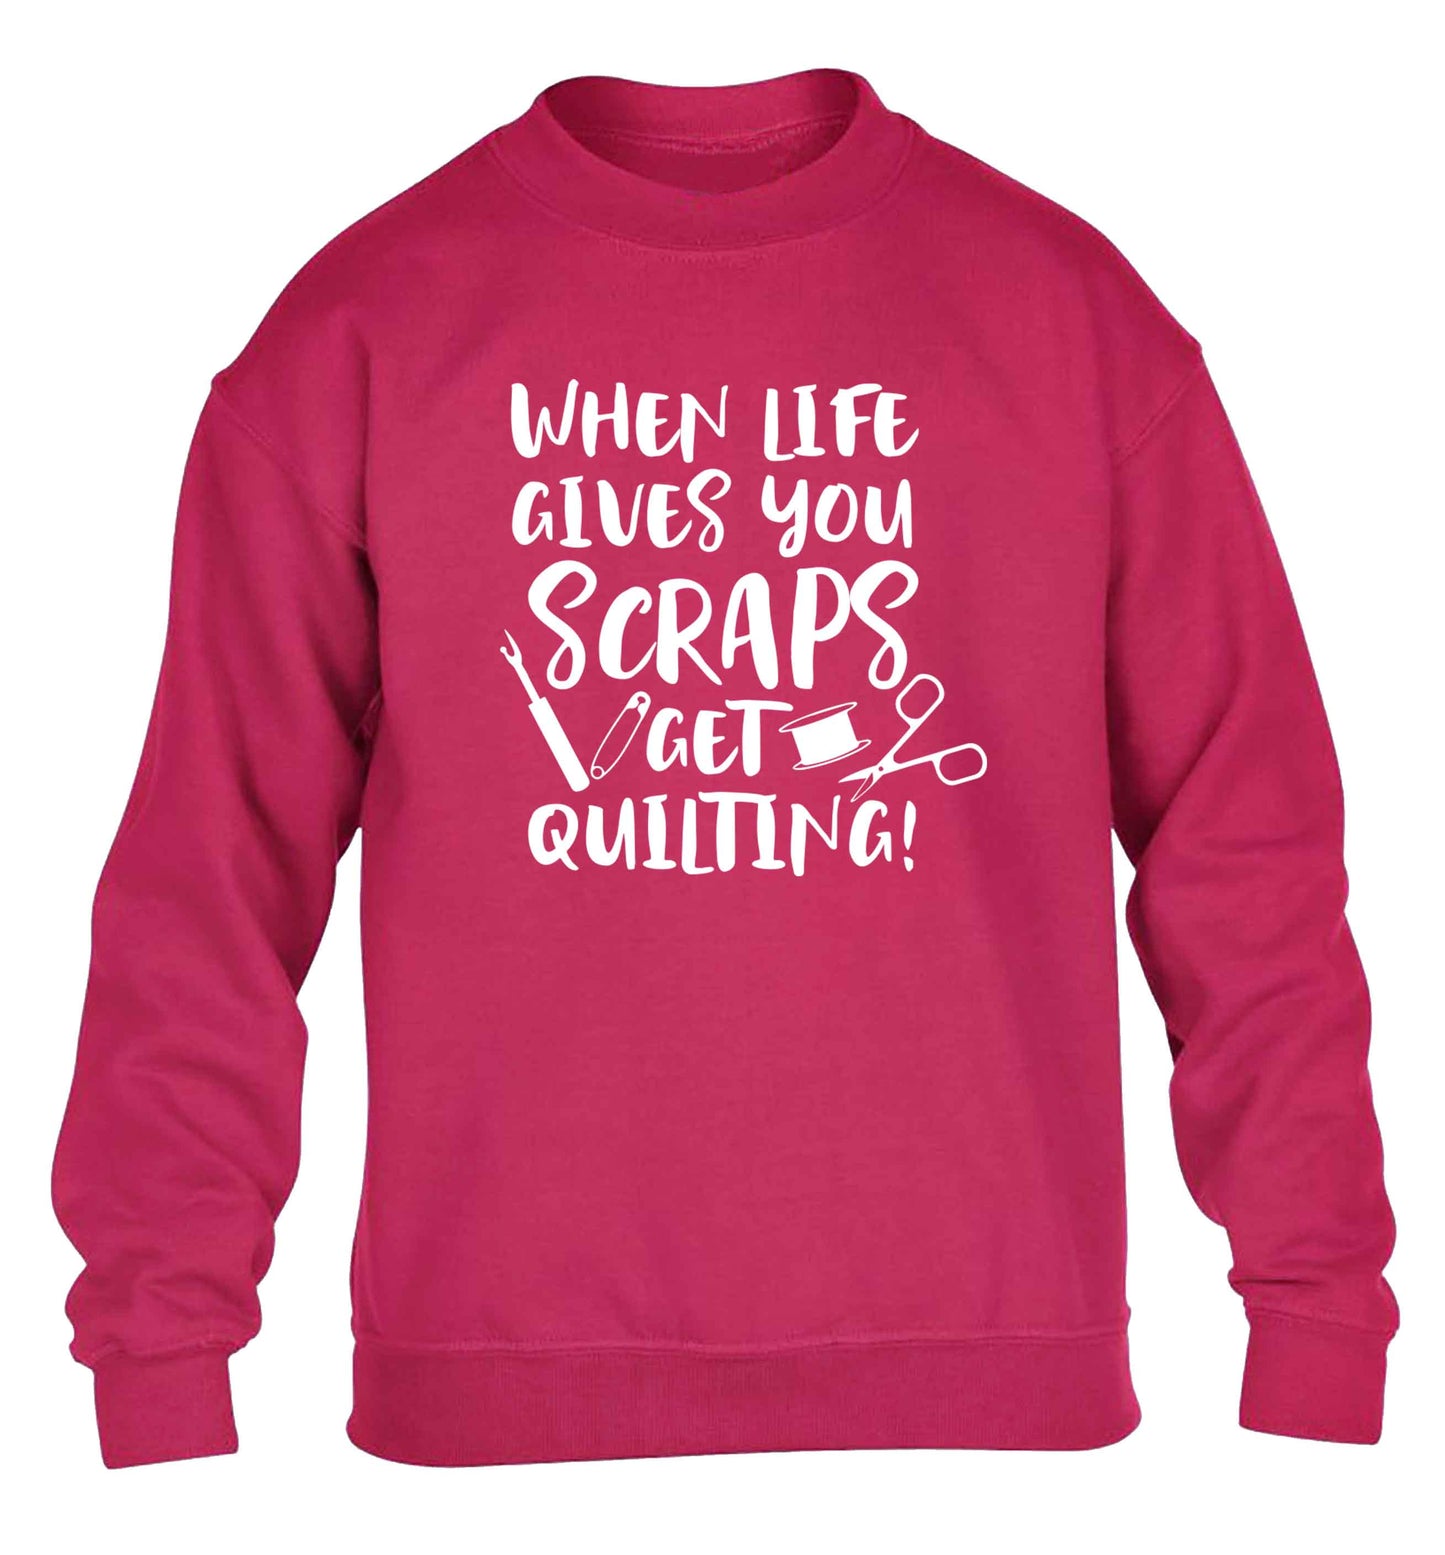 When life gives you scraps get quilting! children's pink sweater 12-13 Years